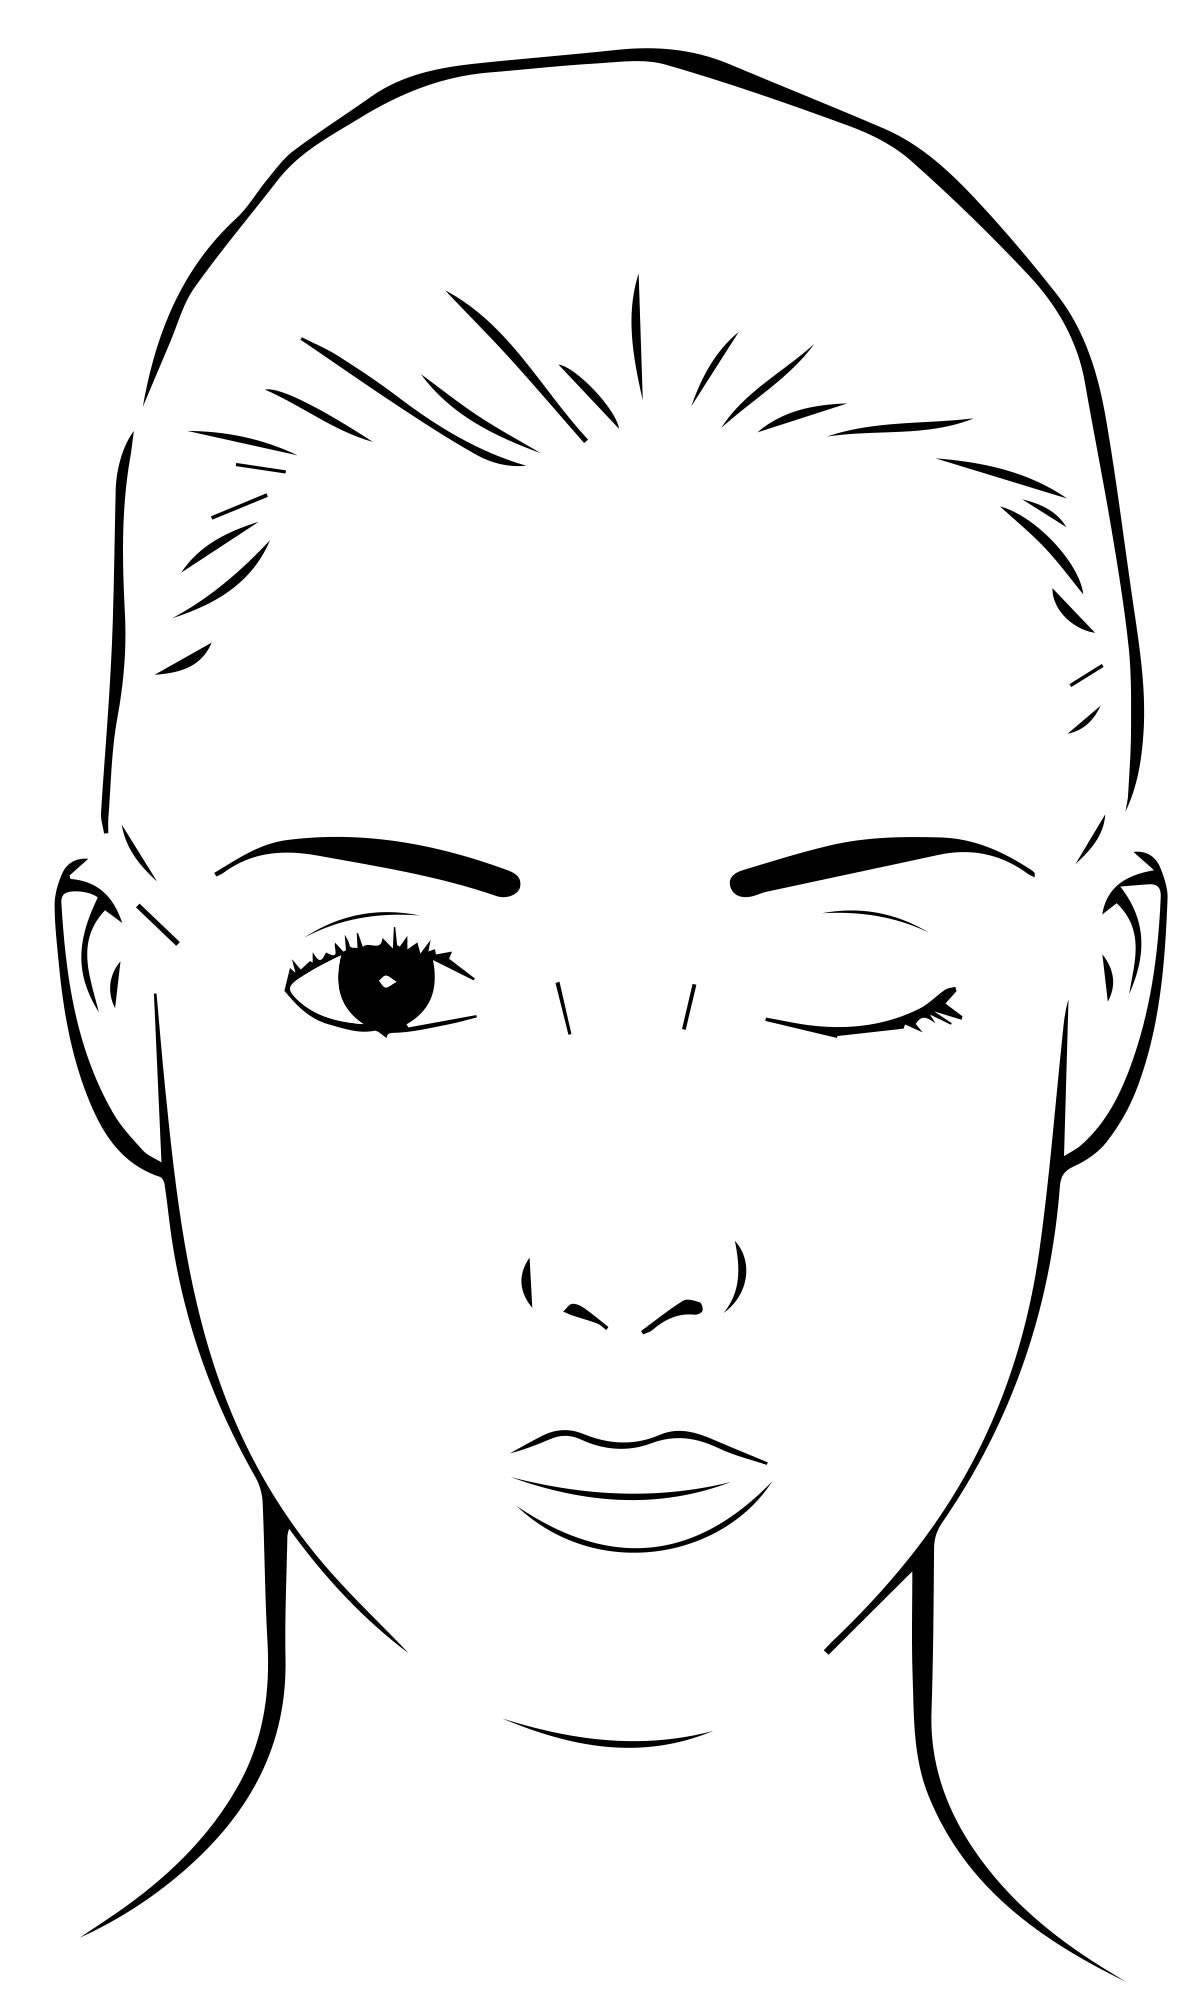 Do your own makeup coloring page